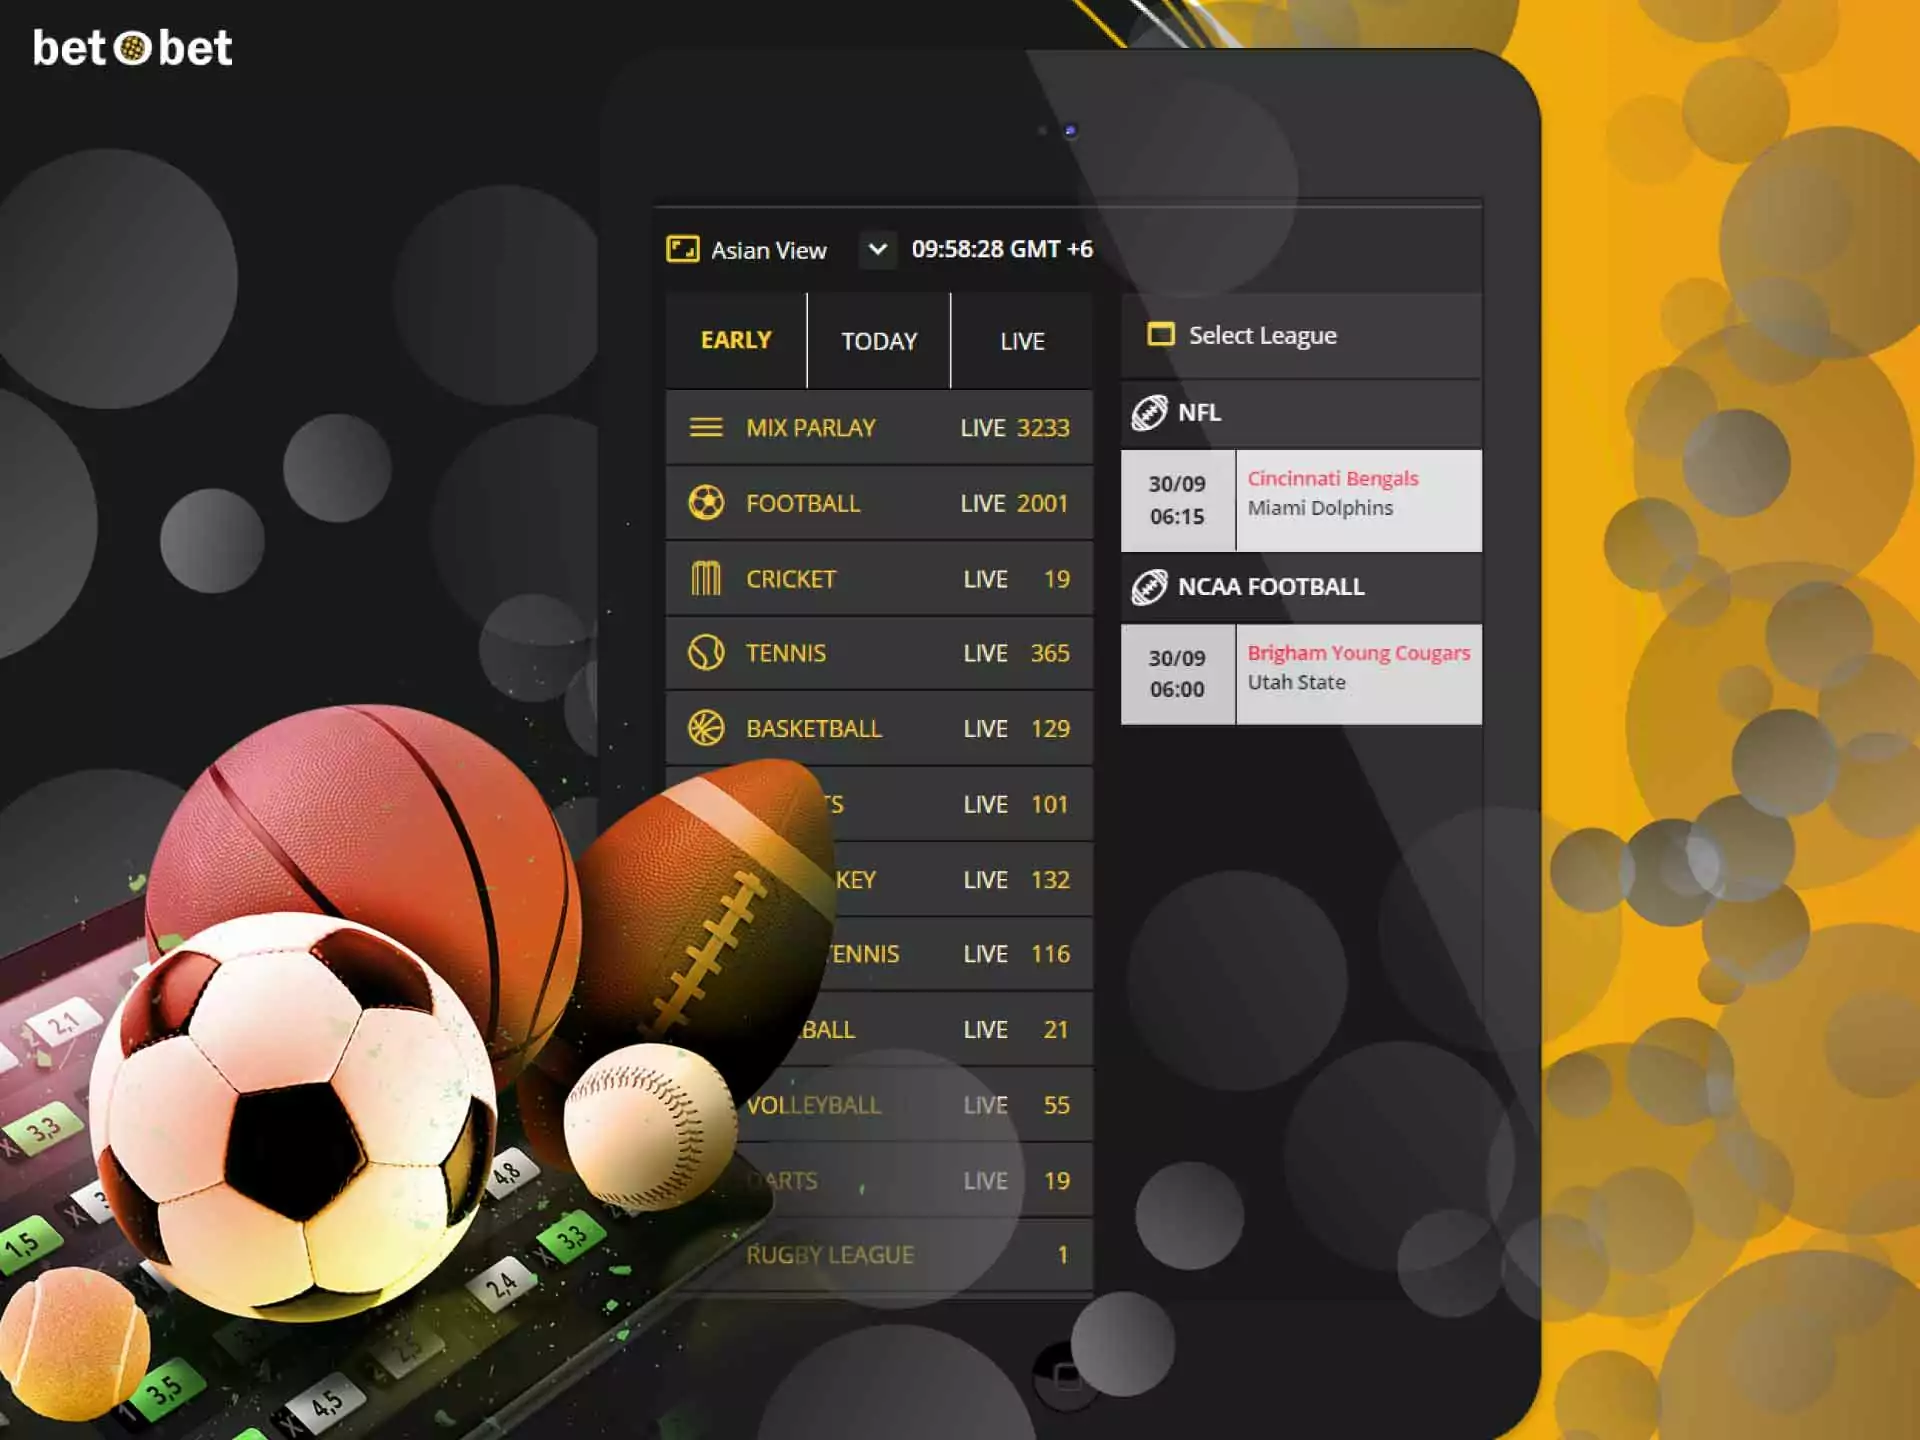 Sign up for BetOBet, top up the account and place a bet.